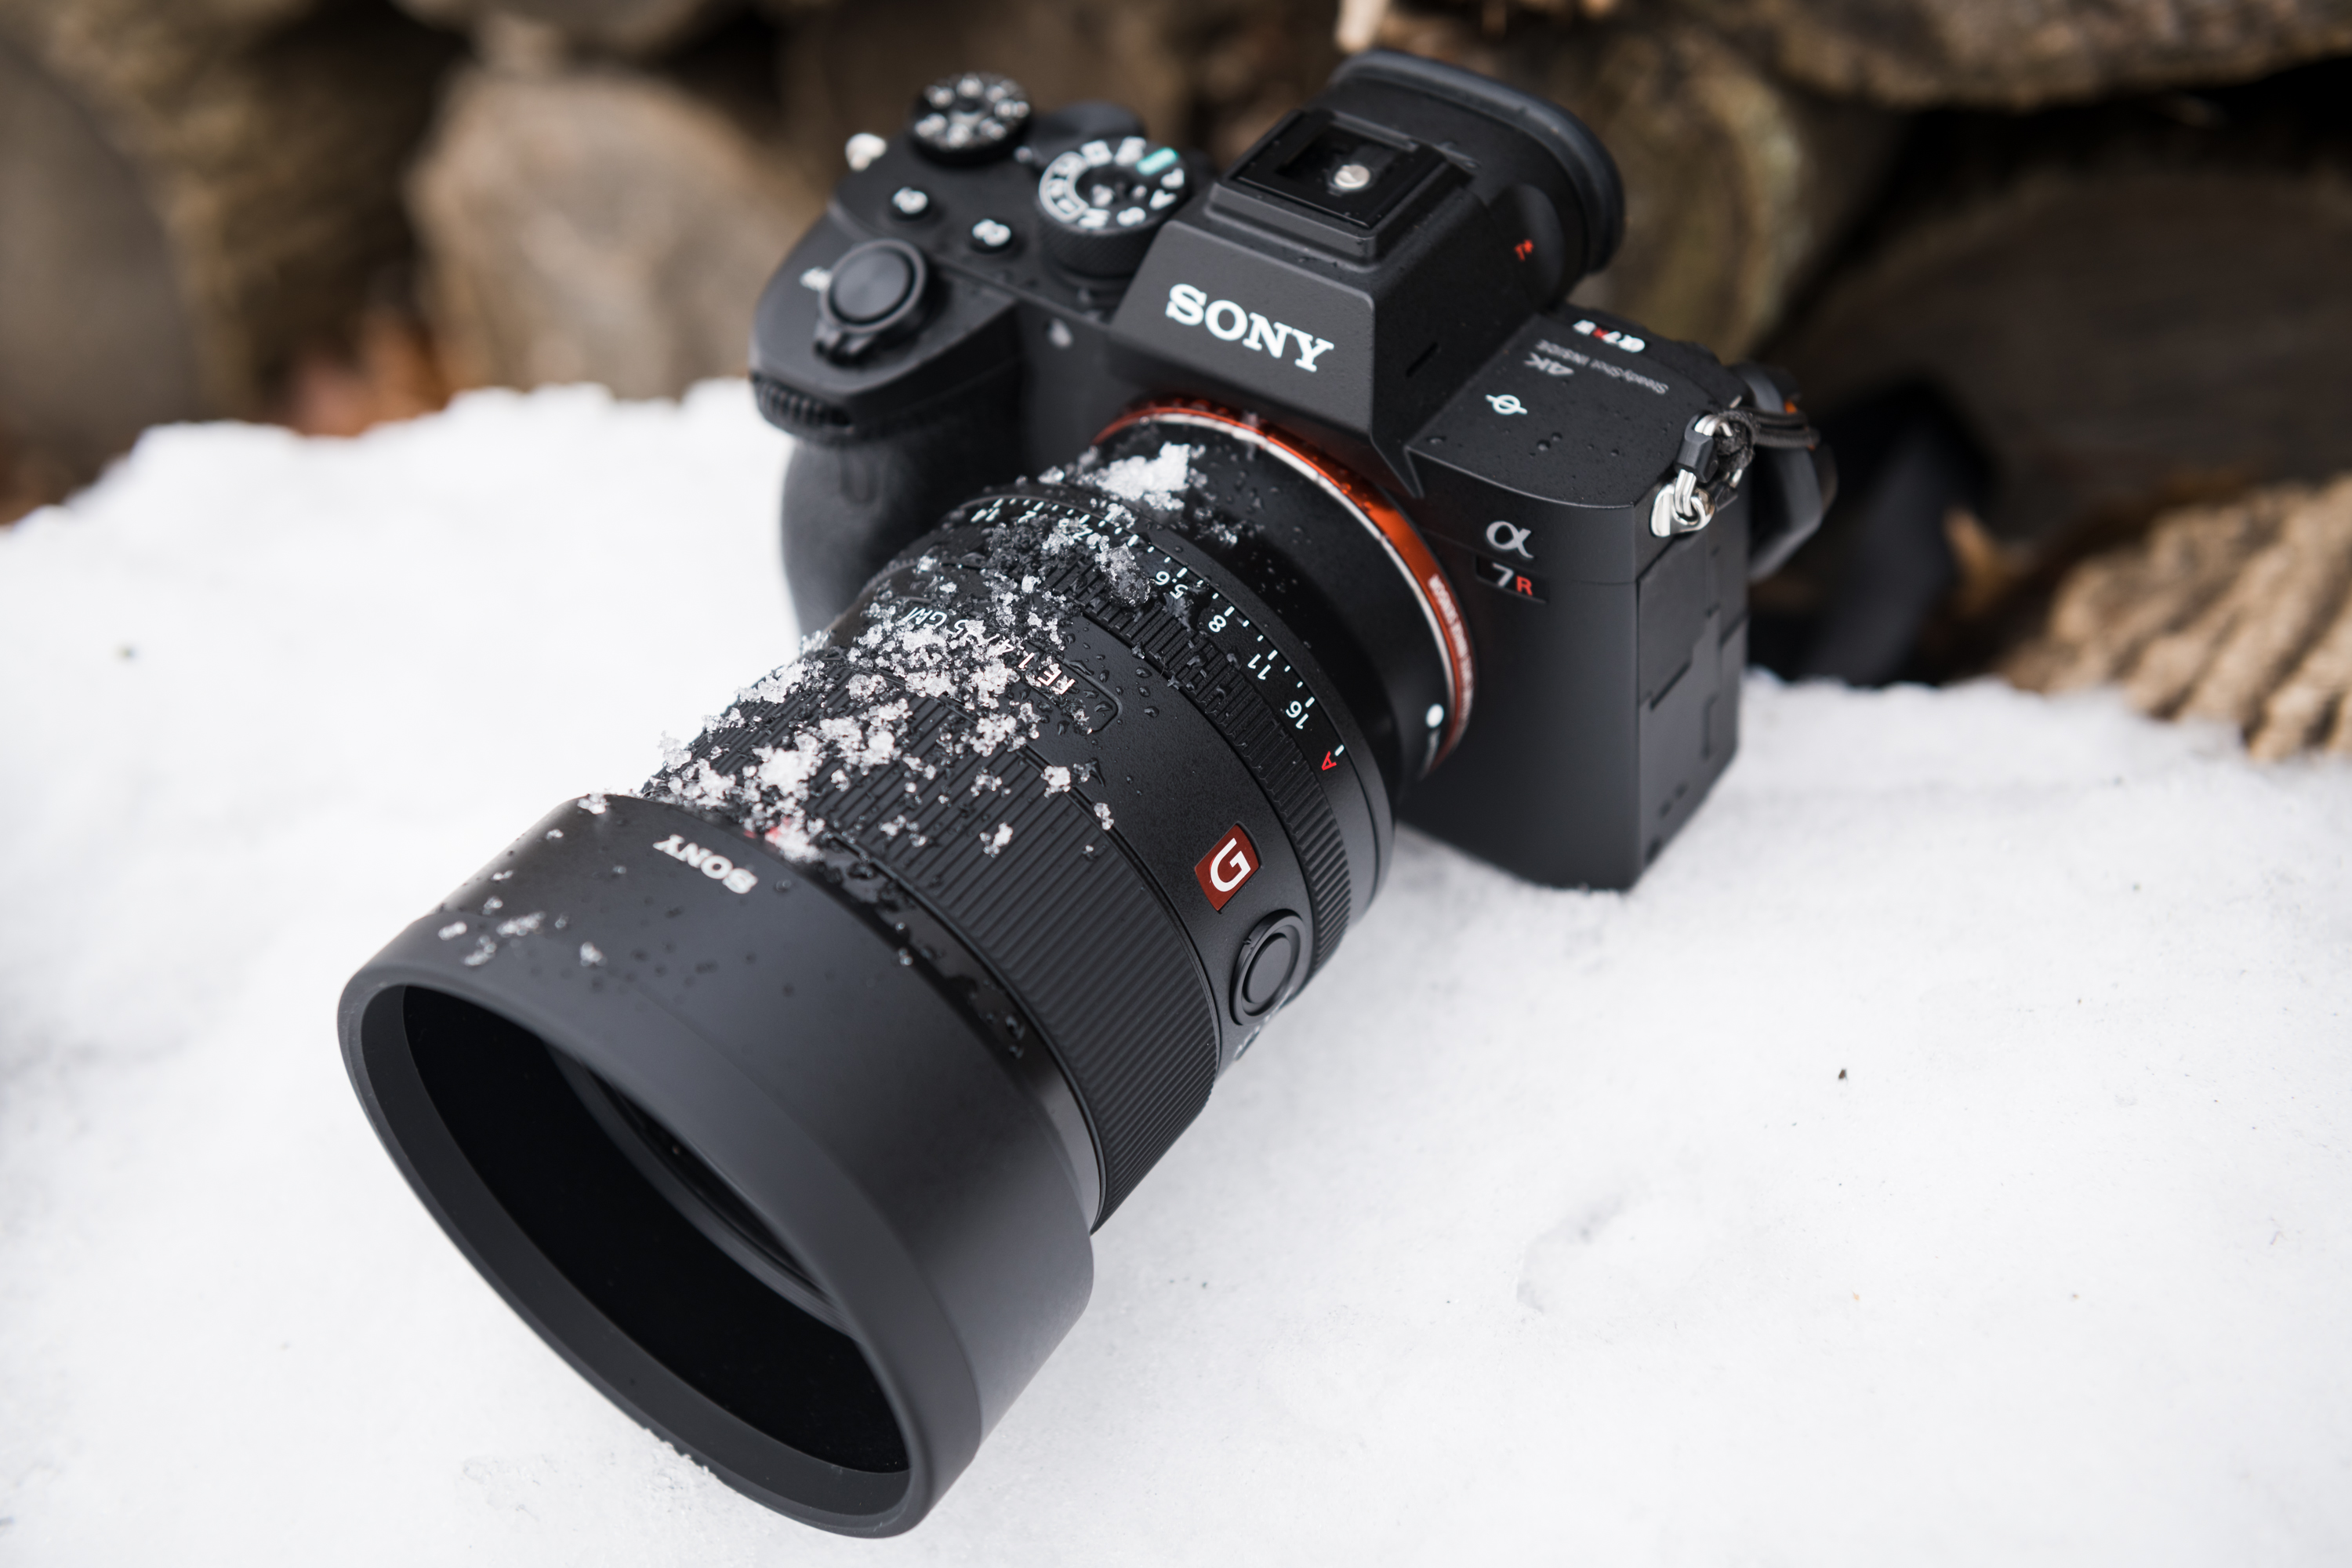 The Best Sony Lens Guide On the Web Just Got Even Better